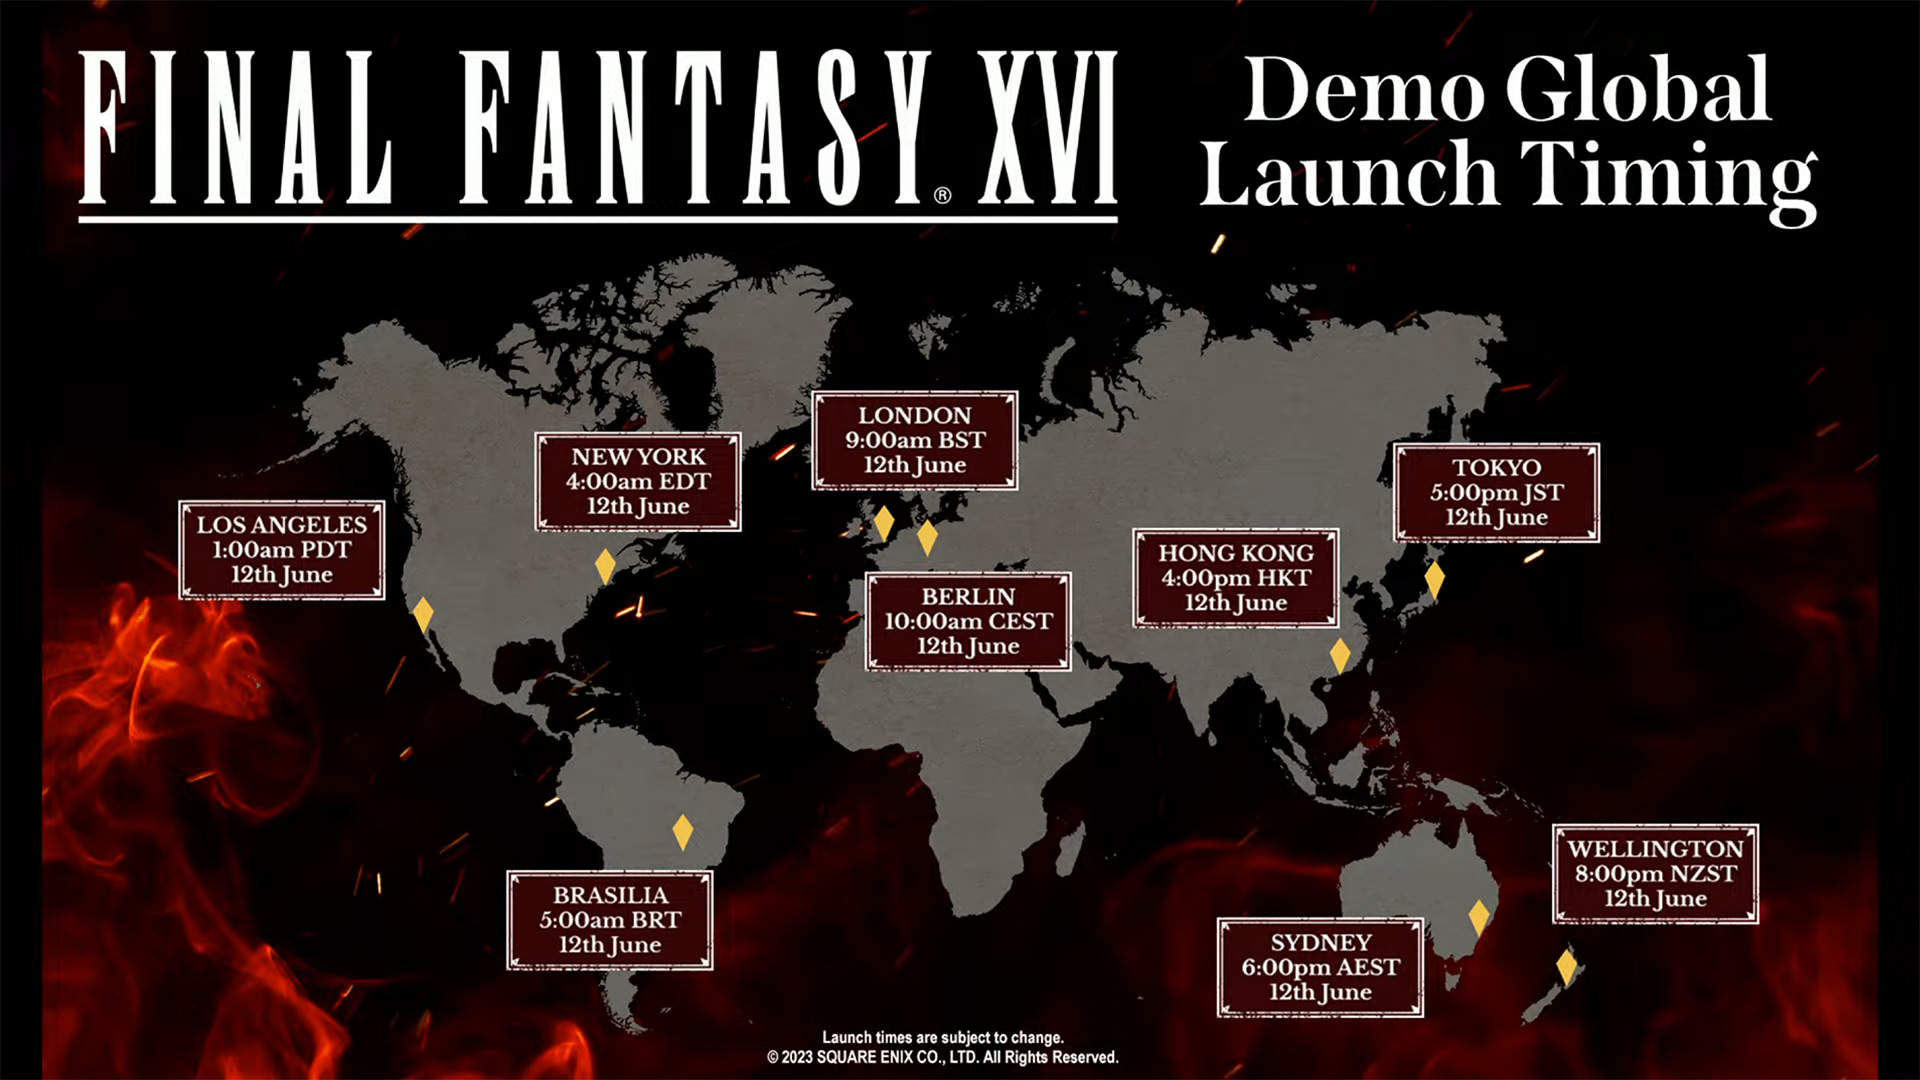 This is when you can look forward to downloading the Final Fantasy XVI demo